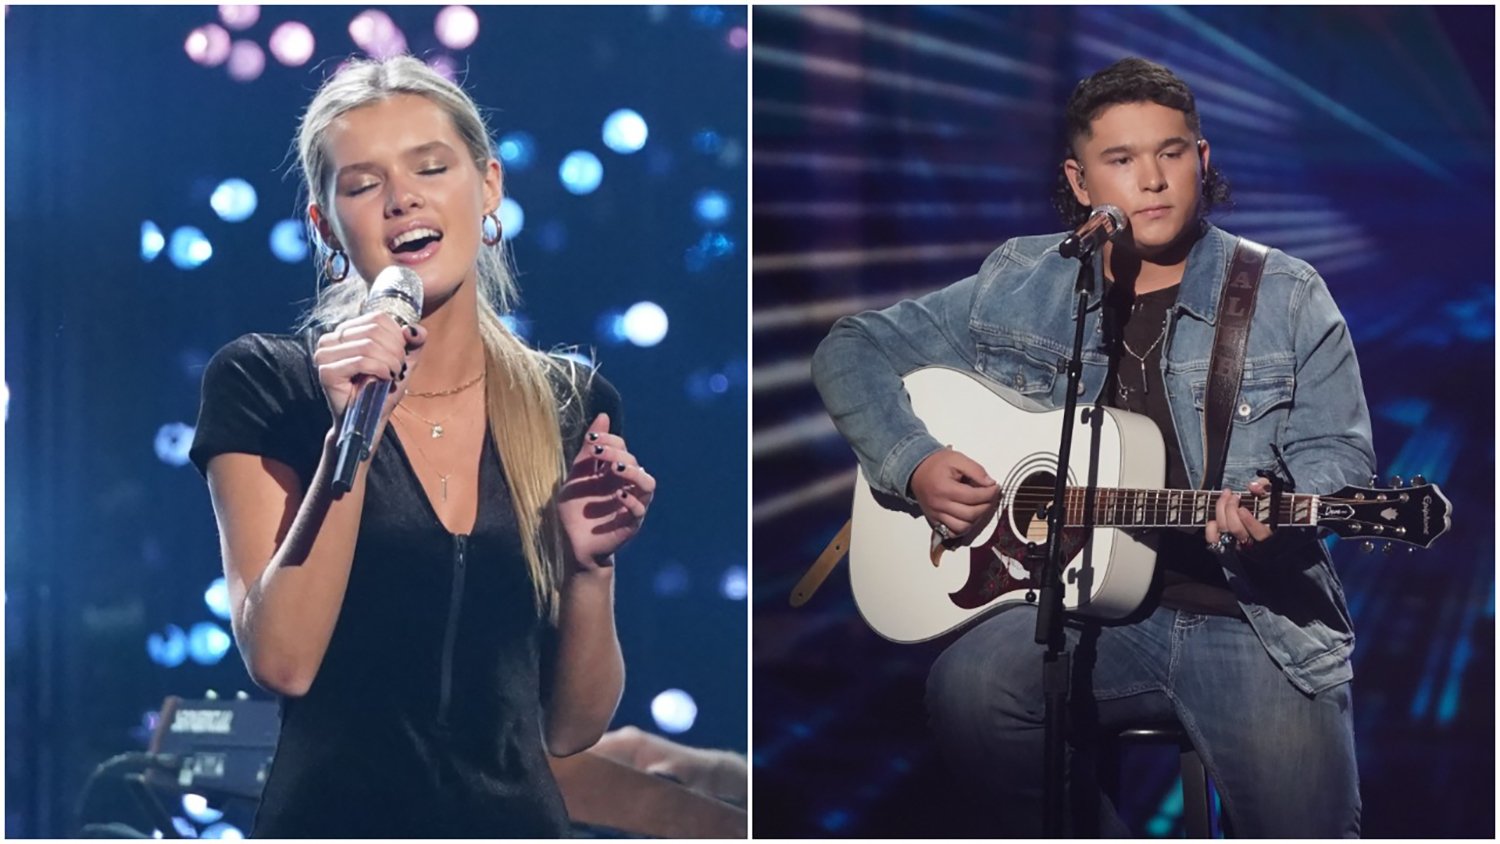 Kenedi Anderson on American Idol Season 20 and Caleb Kennedy on American Idol Season 19 after both quit the competition.